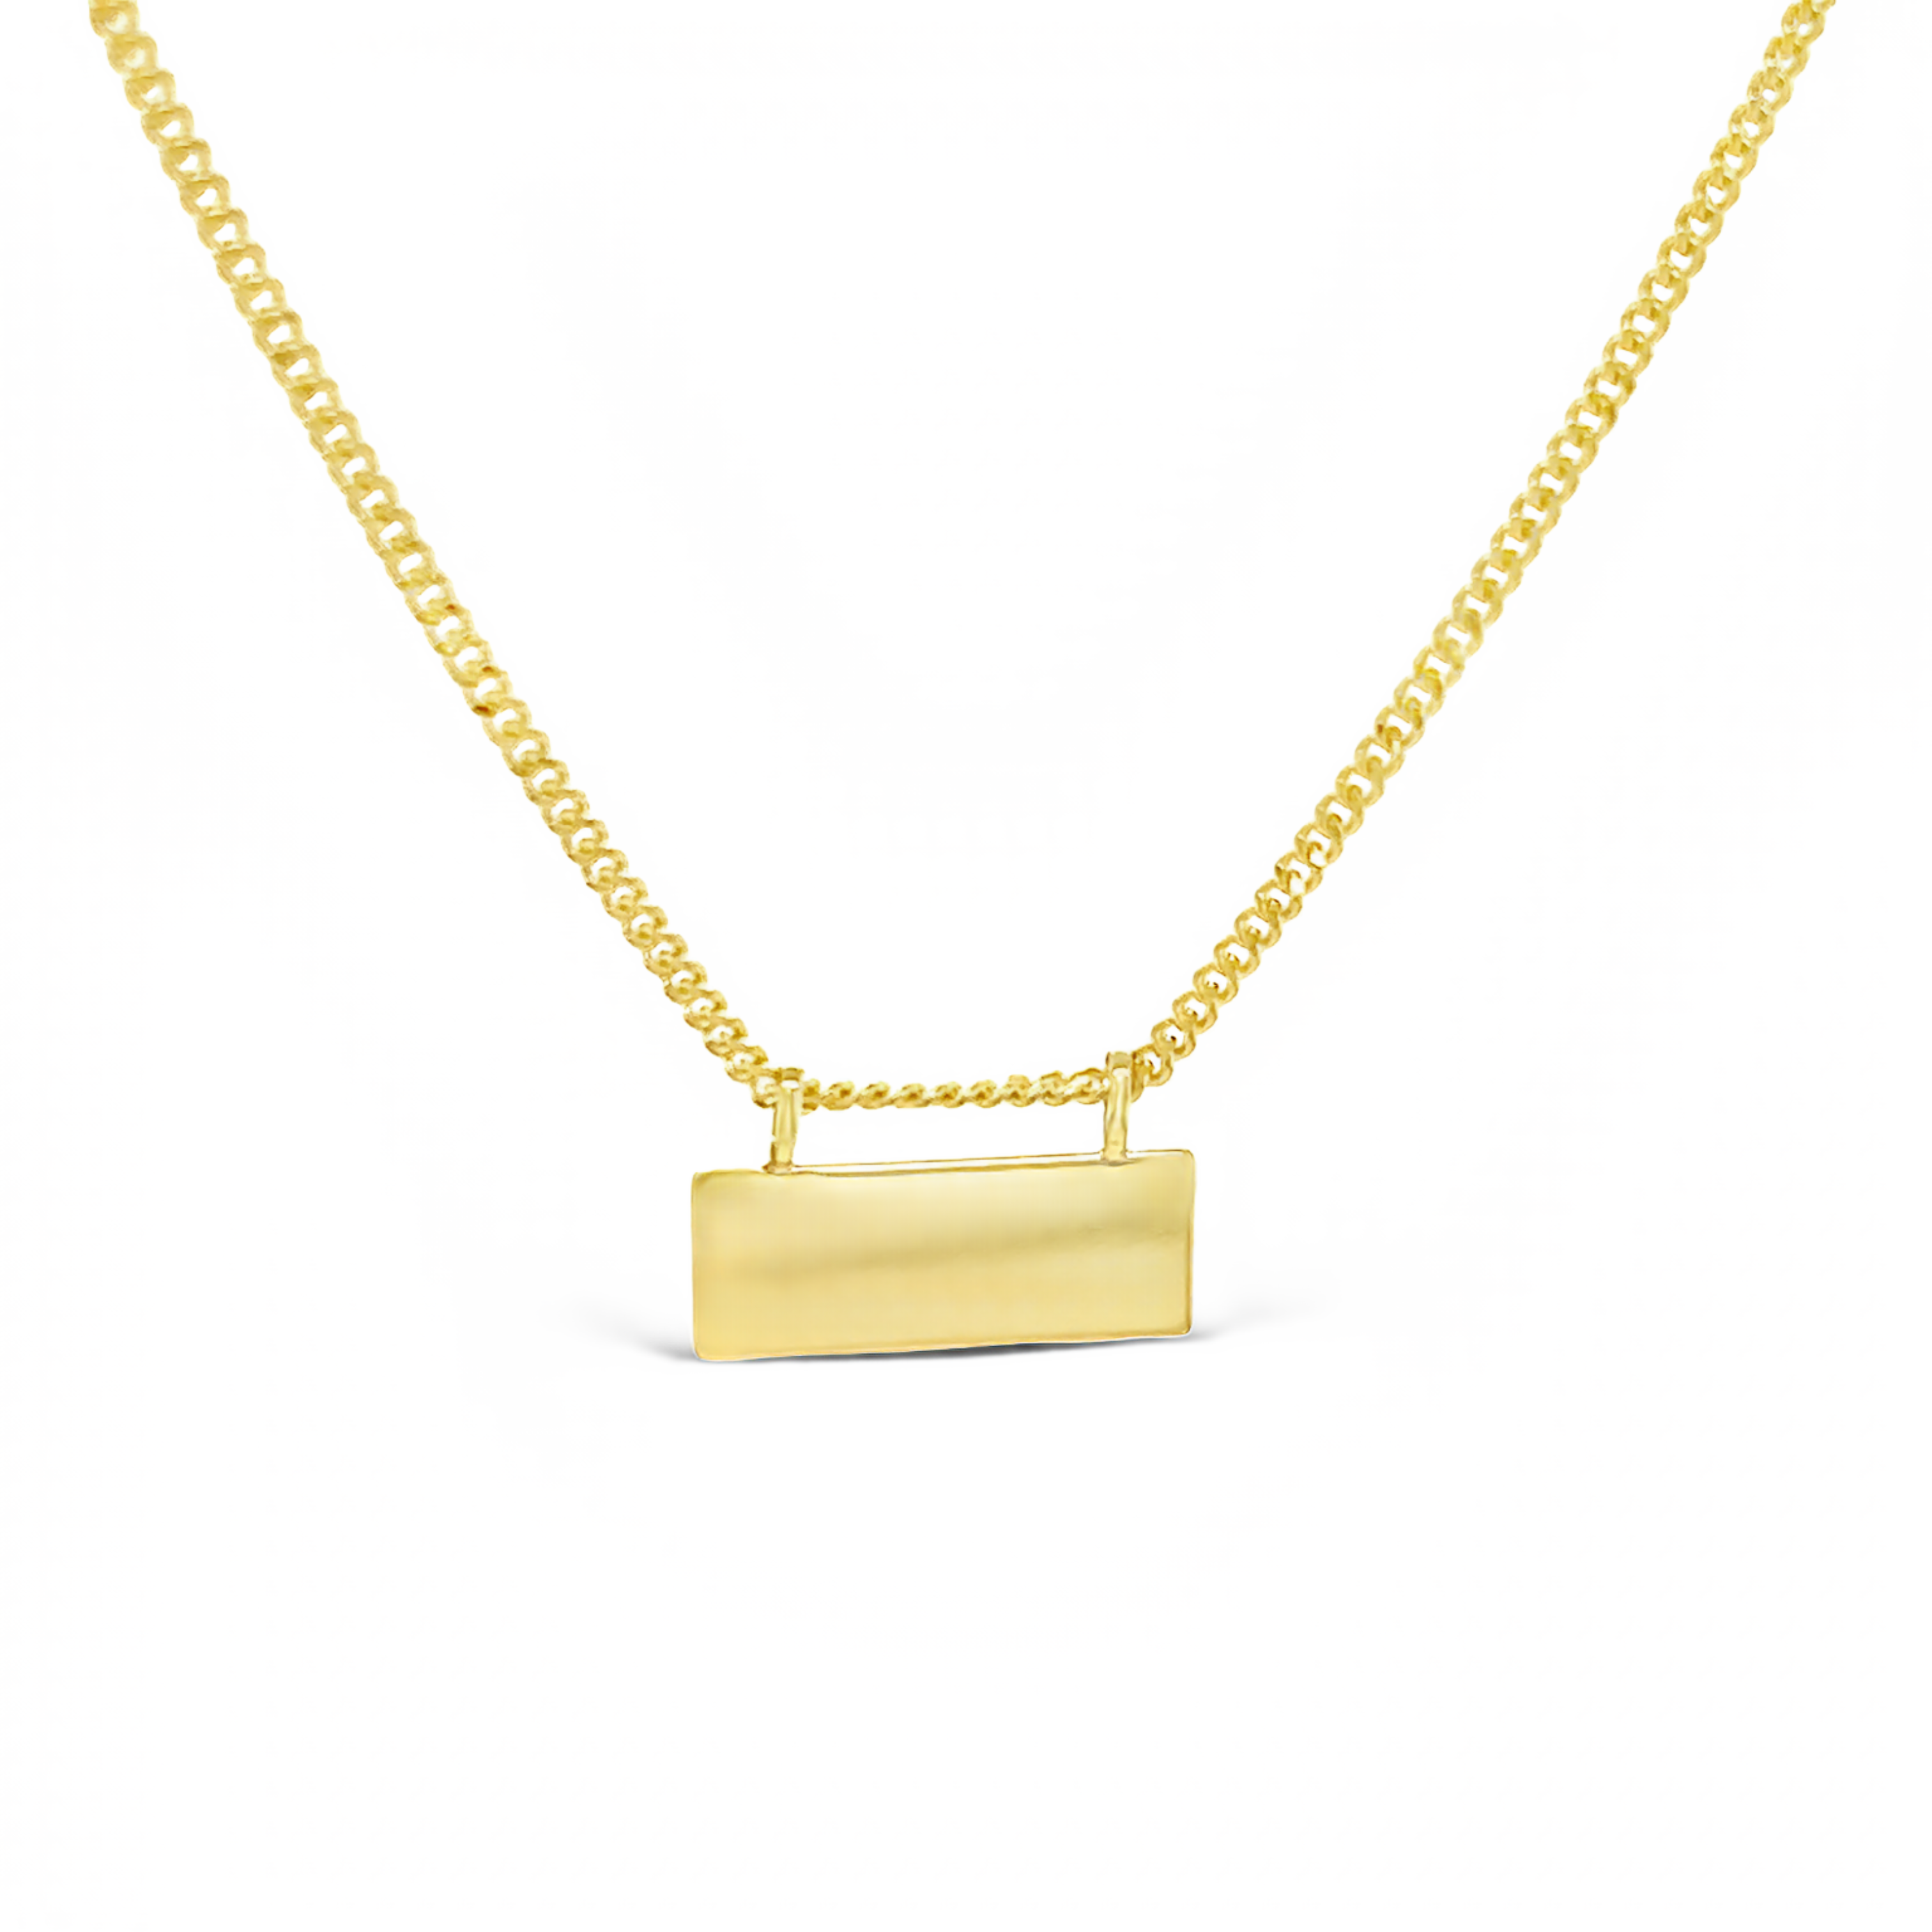 14k Yellow Gold Engravable Plate Necklace